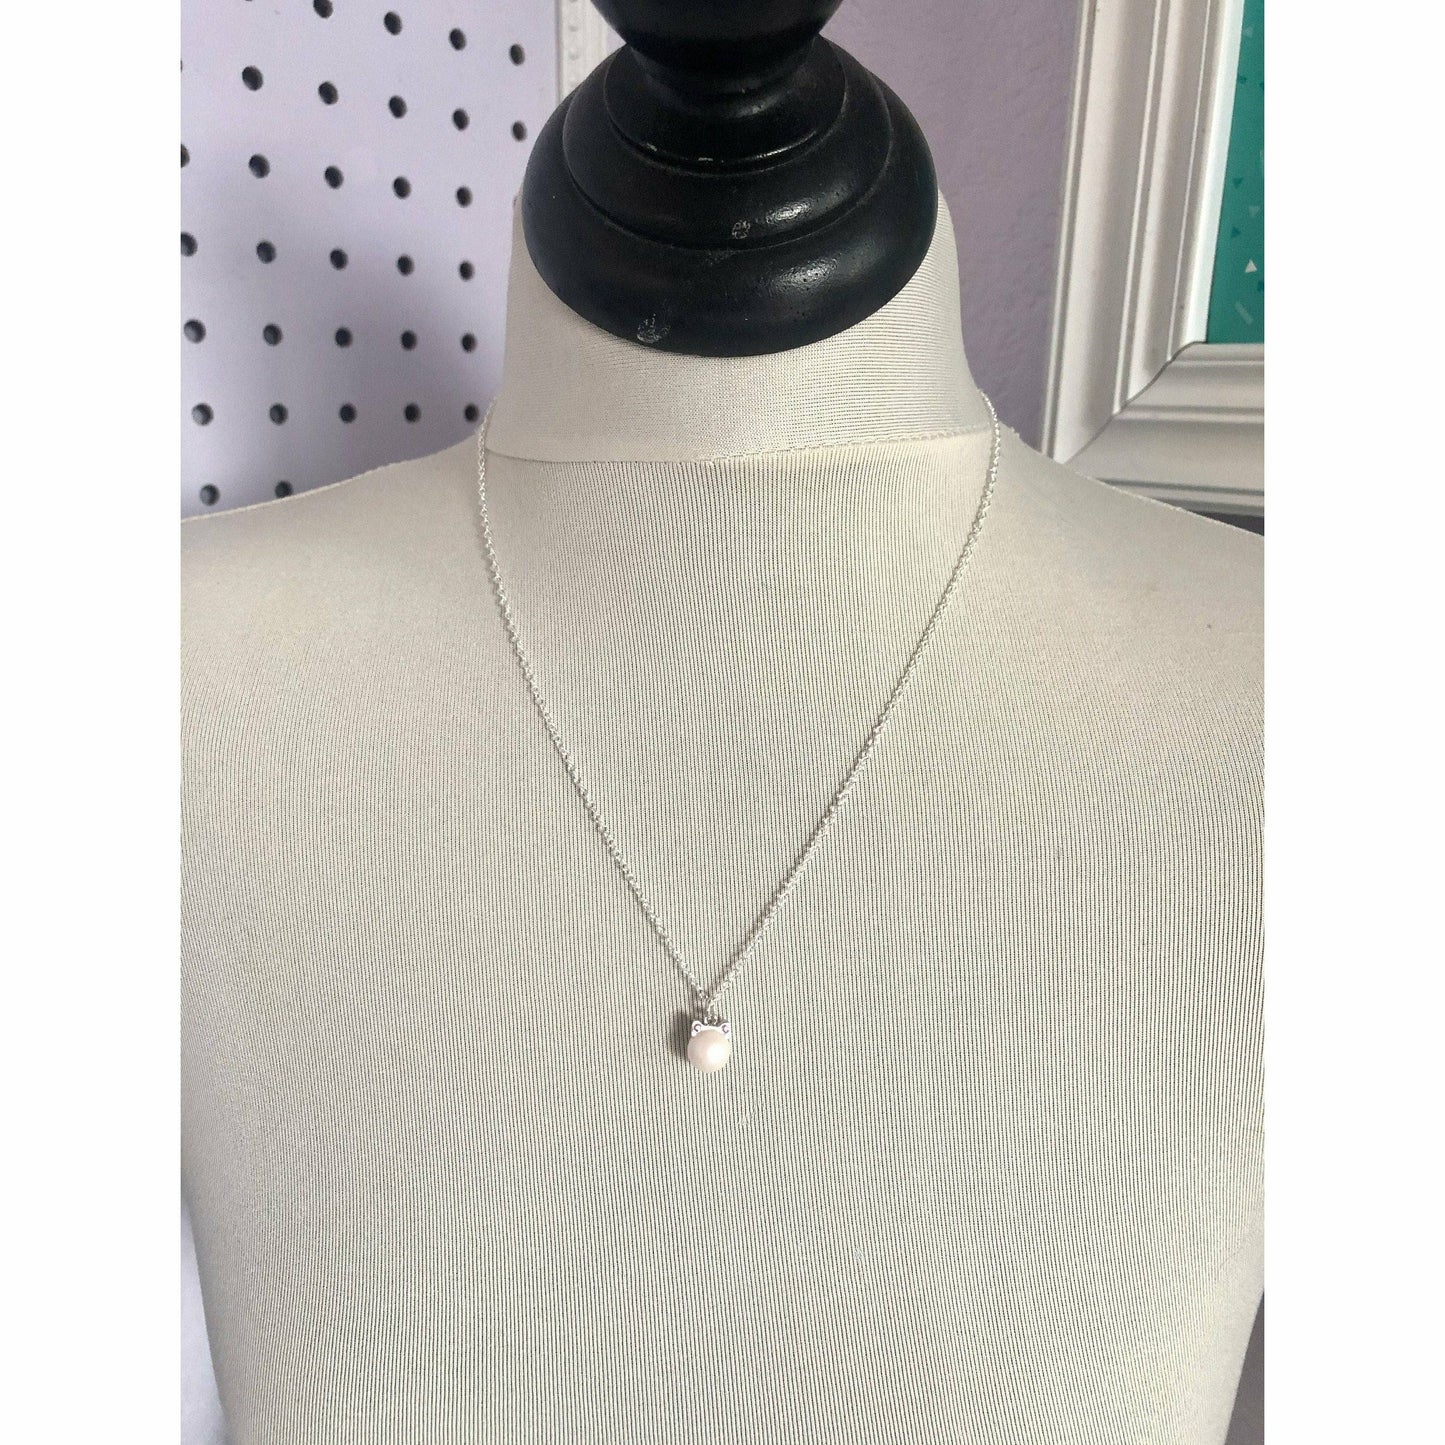 White pearl cat necklace